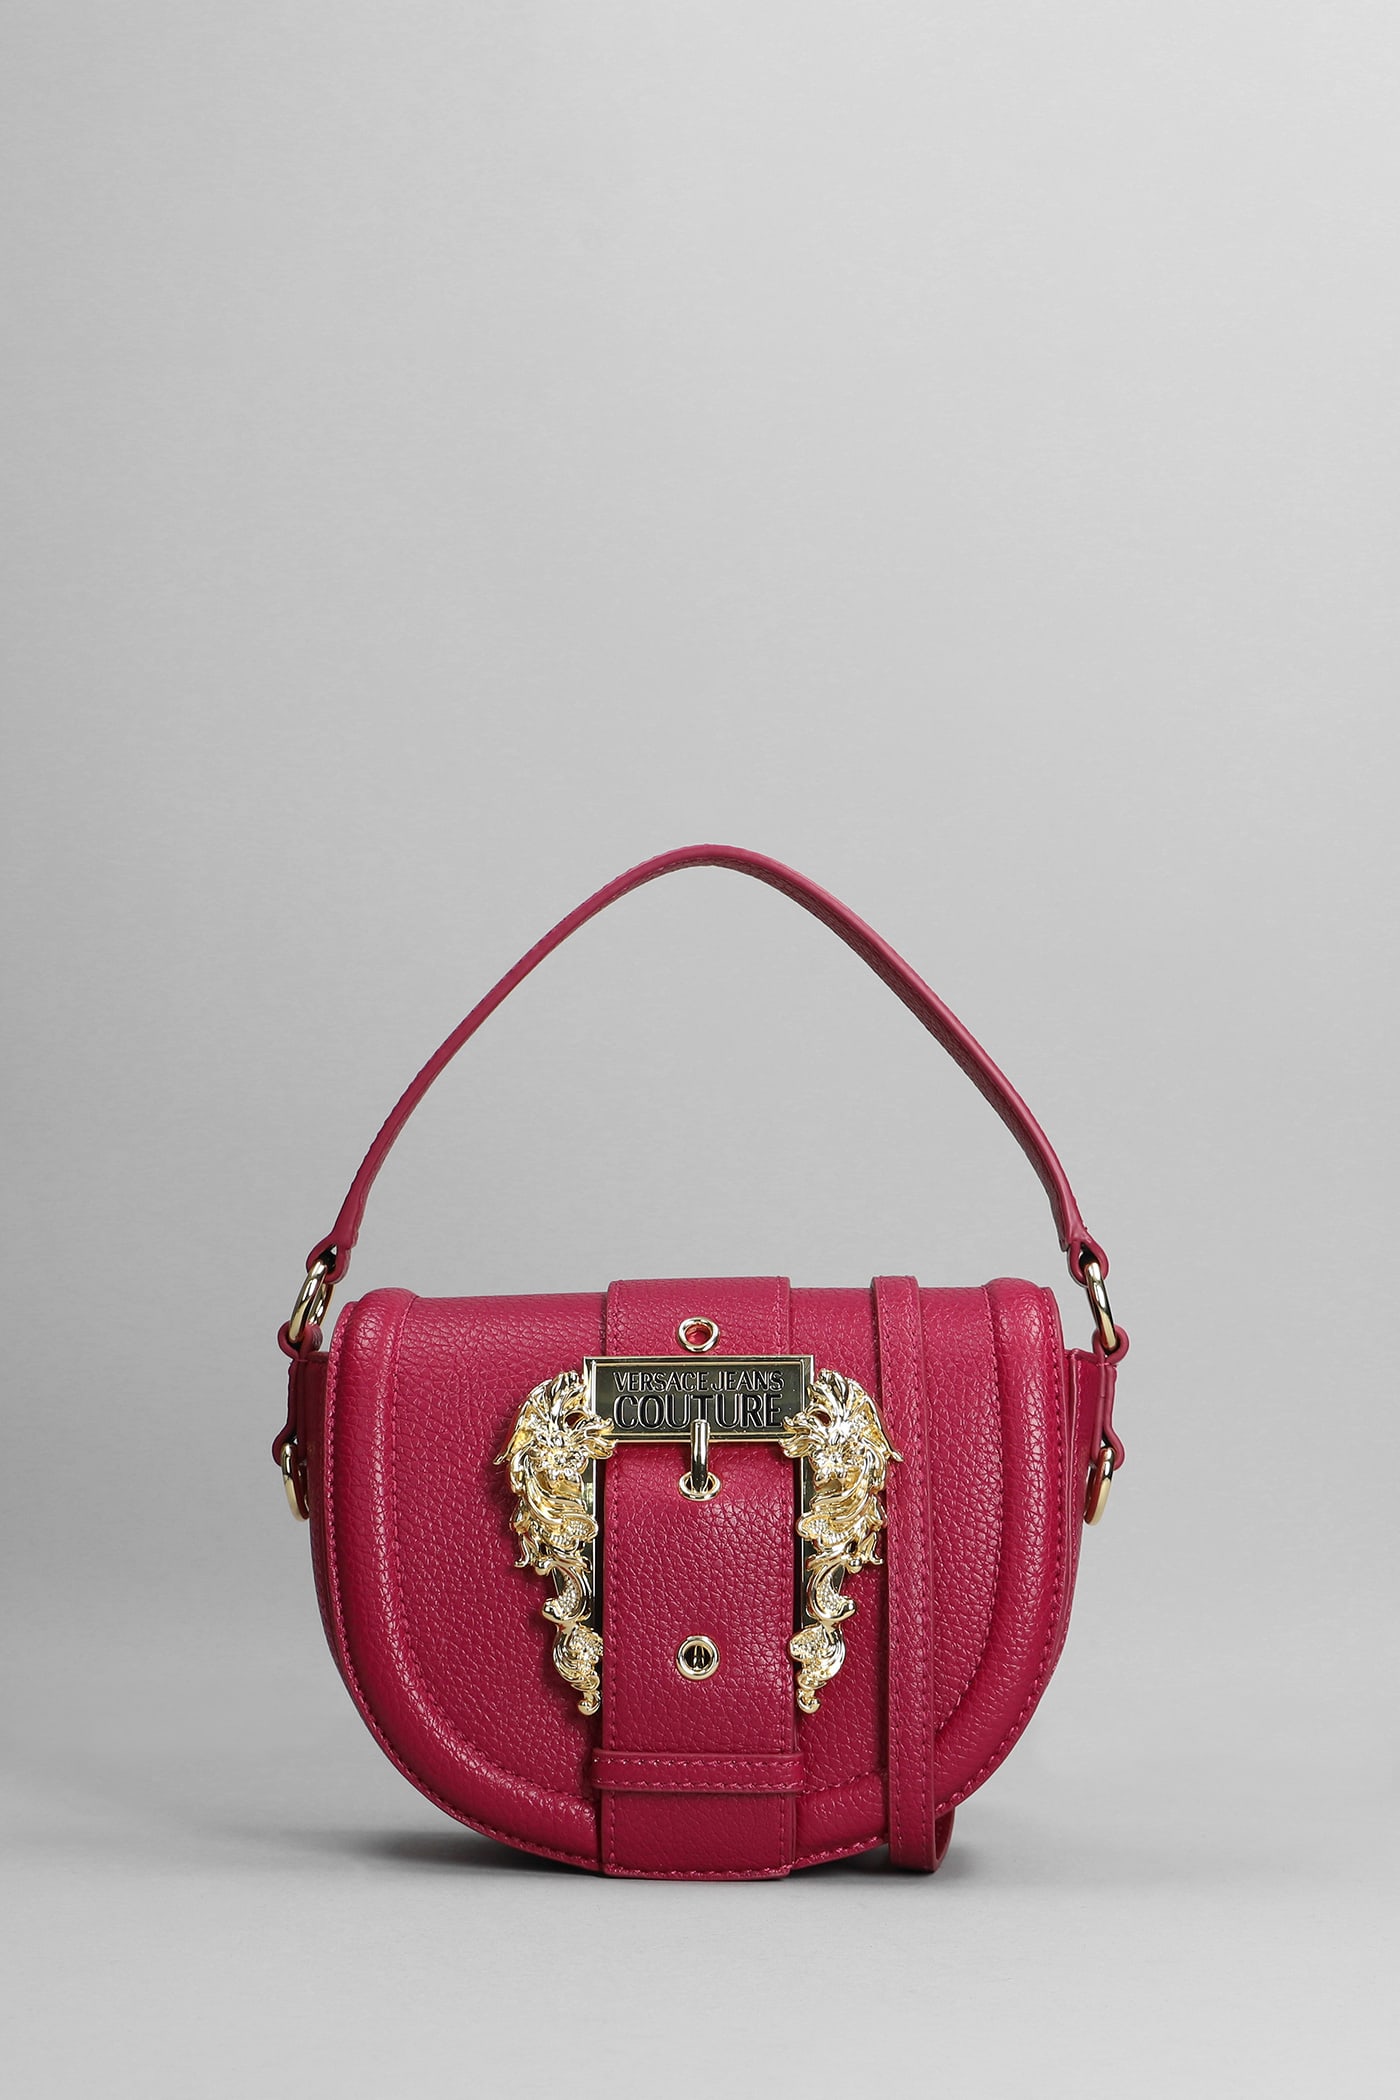 Versace Jeans Couture Hand Bag In Bordeaux Faux Leather